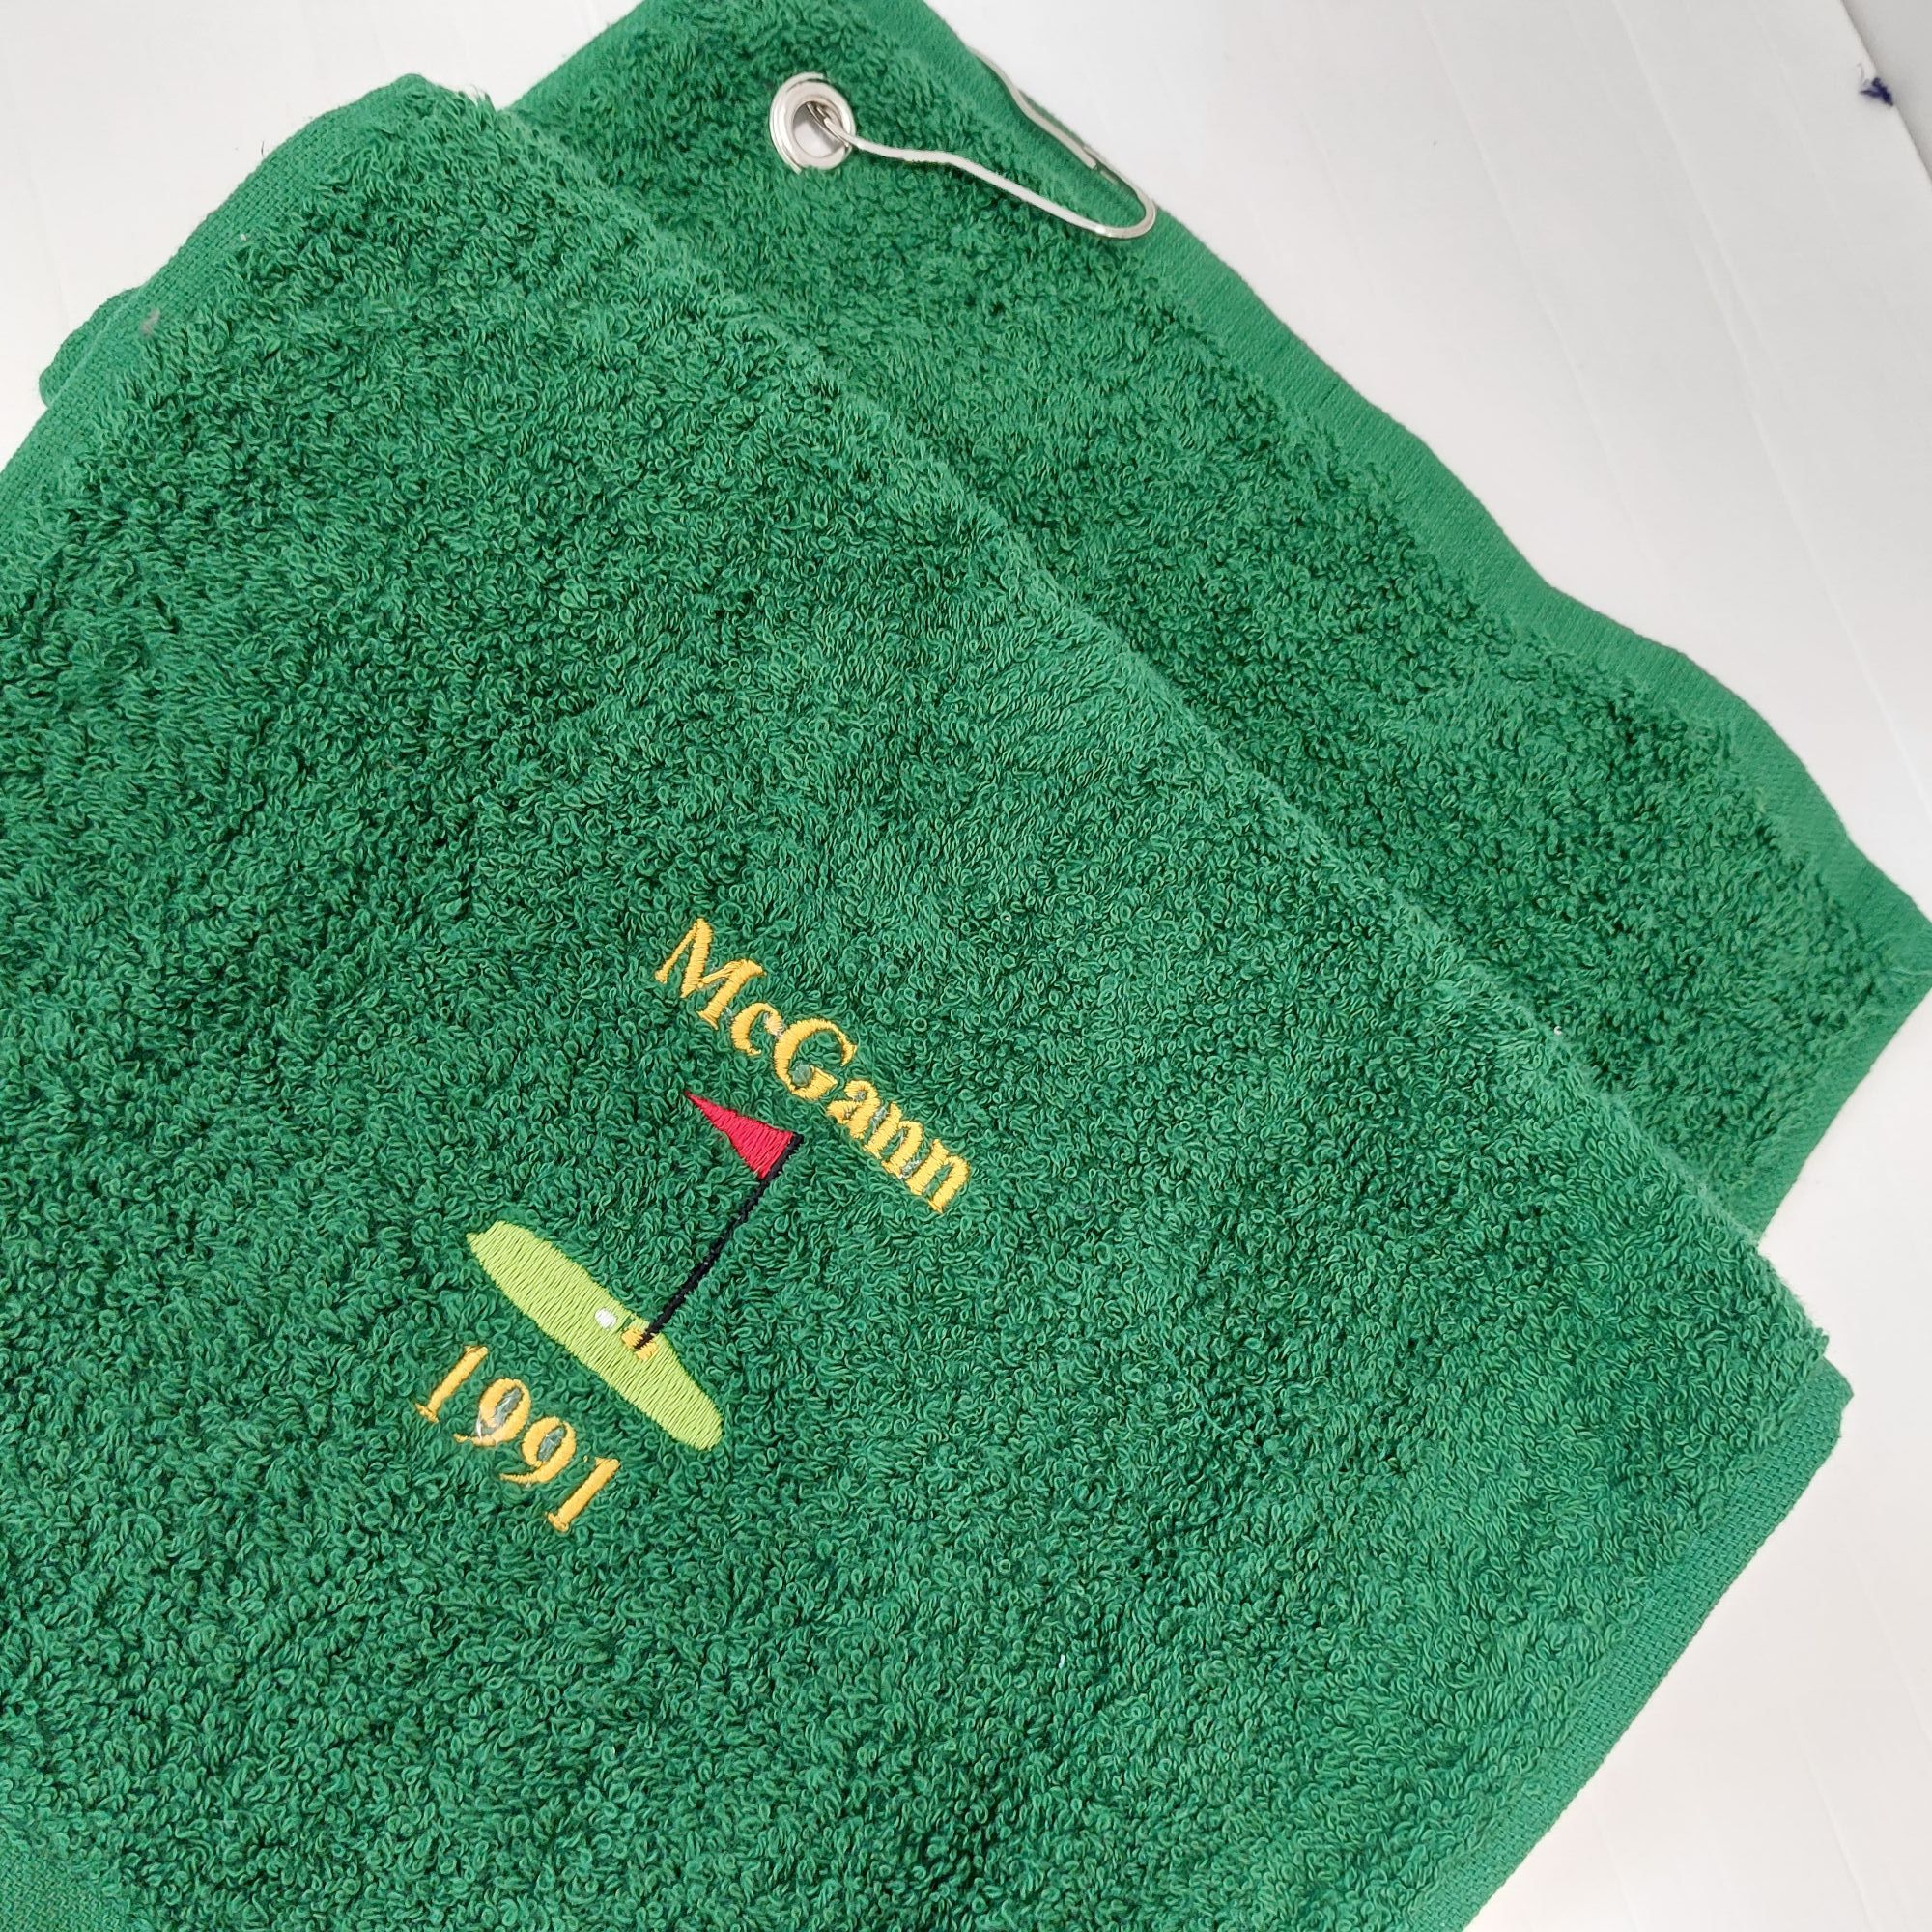 Personalised Golf Towel | Mother's Day Gift | Gift for Golfers